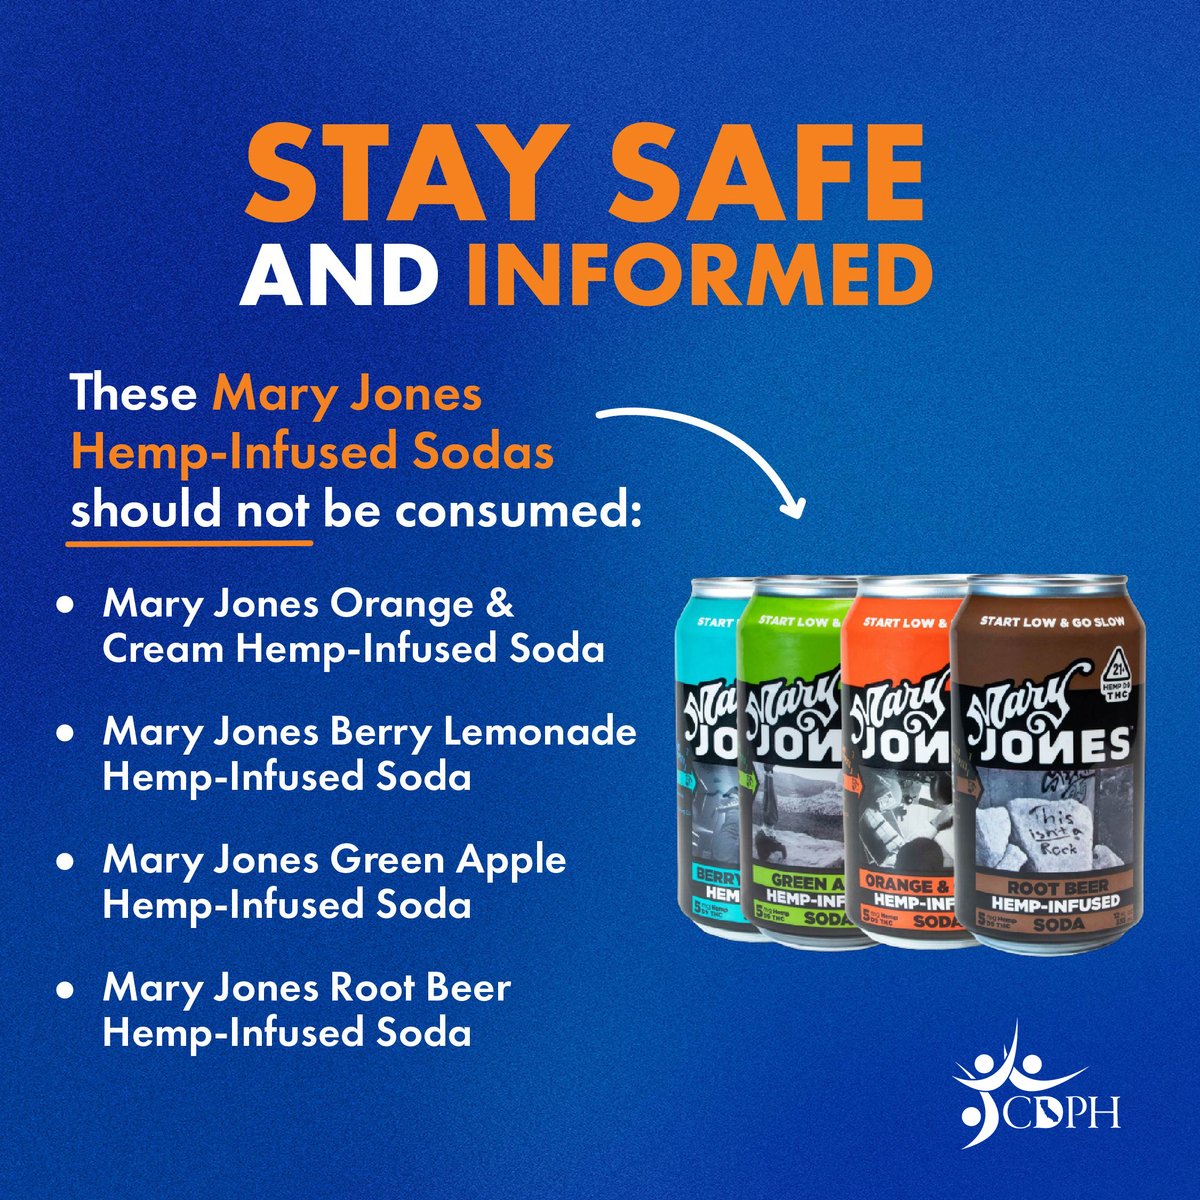 CDPH is warning consumers not to drink Mary Jones hemp-infused soda, which have been identified as containing prohibited THC ingredients. These products are inaccurately labeled and contain ingredients posing a risk of unintended intoxication. Learn more: cdph.ca.gov/Programs/OPA/P…